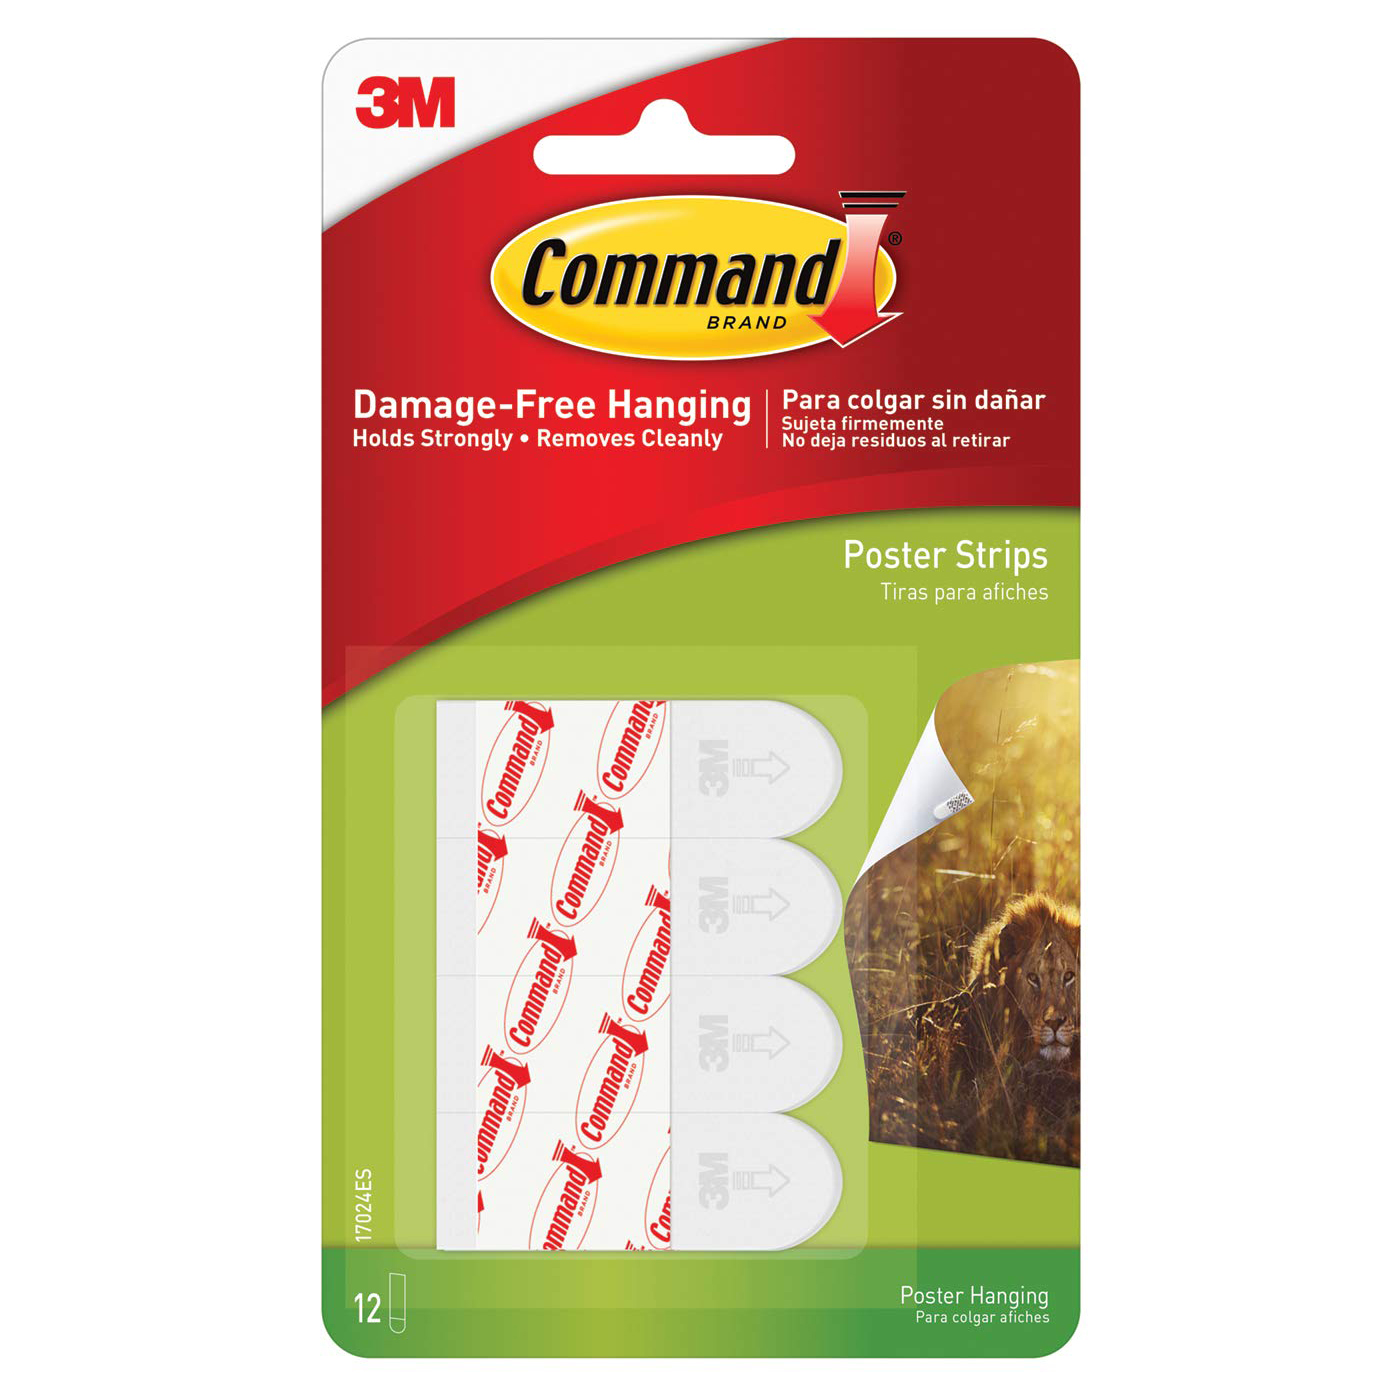 3M CMD-POSH Command Poster Hanging Strips [Removable]